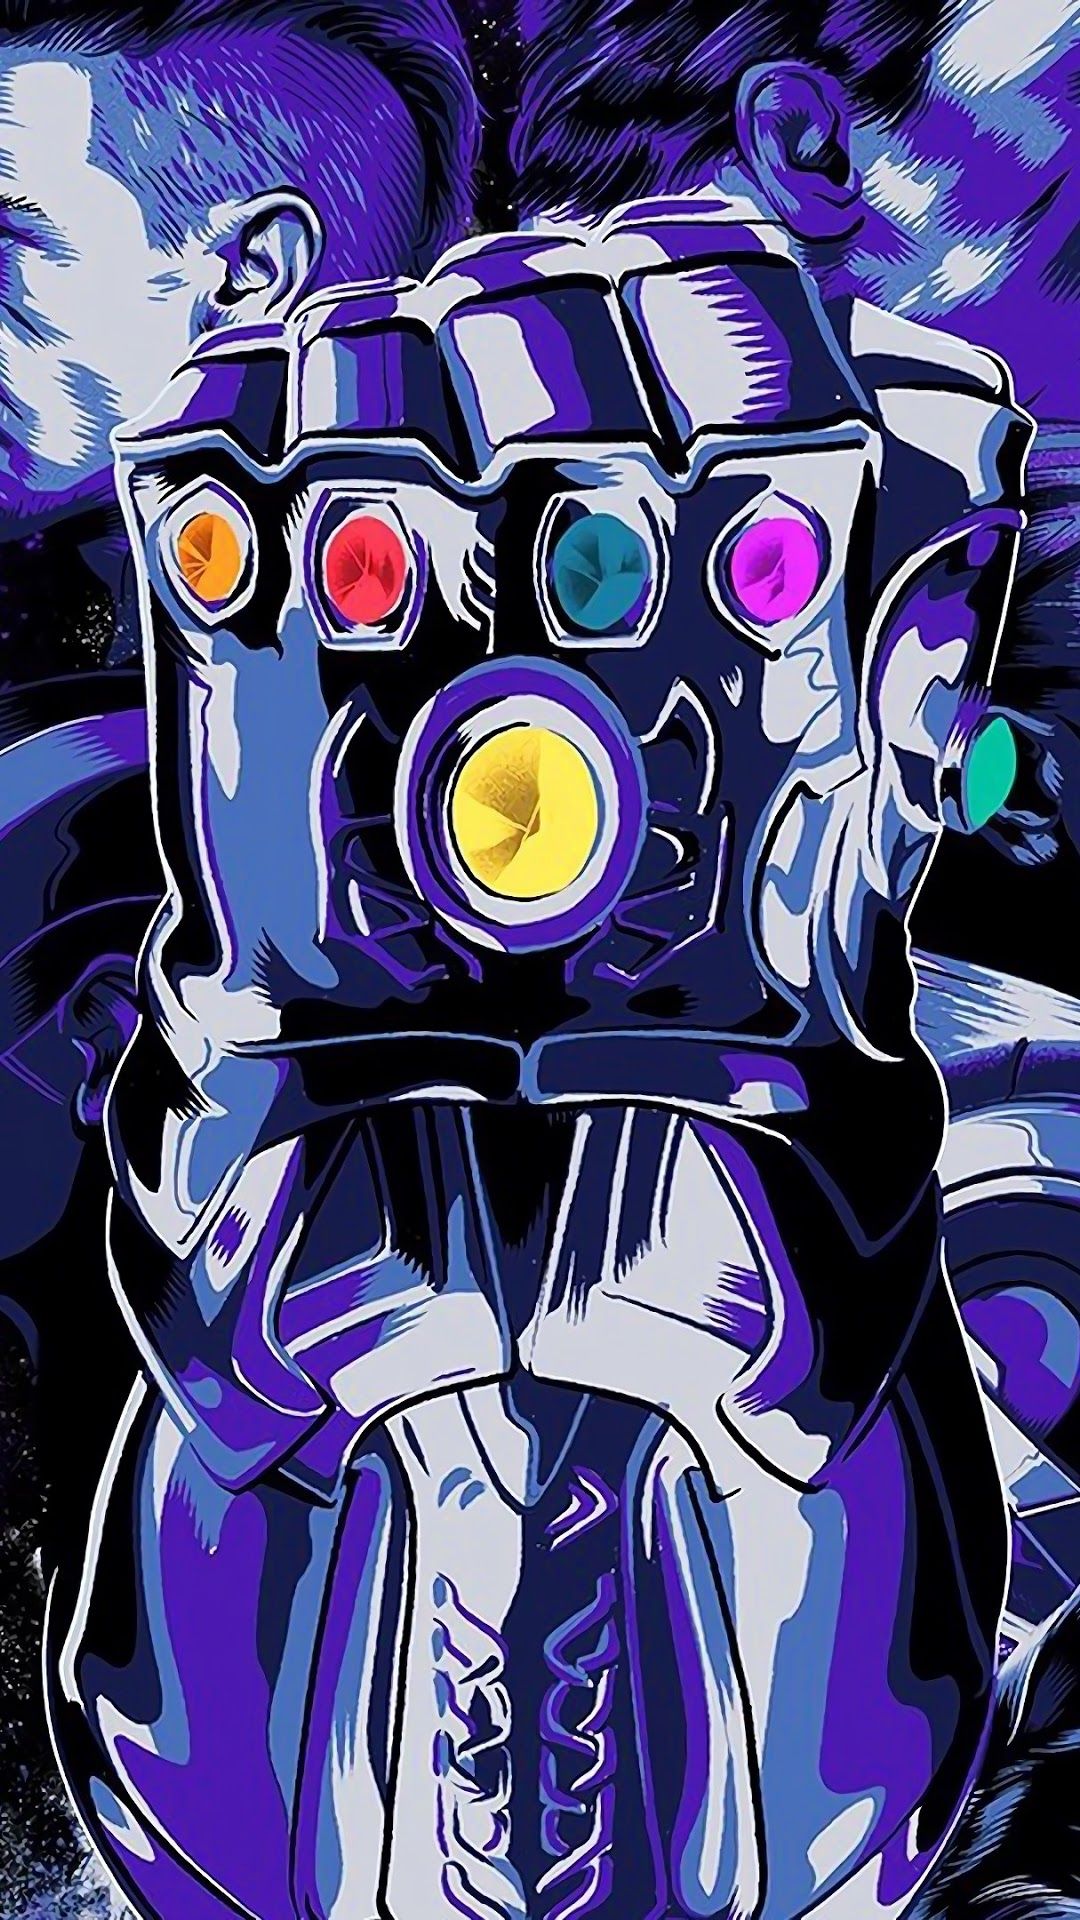 Avengers: Endgame, Infinity Gauntlet phone HD Wallpaper, Image, Background, Photo and Picture. Mocah HD Wallpaper